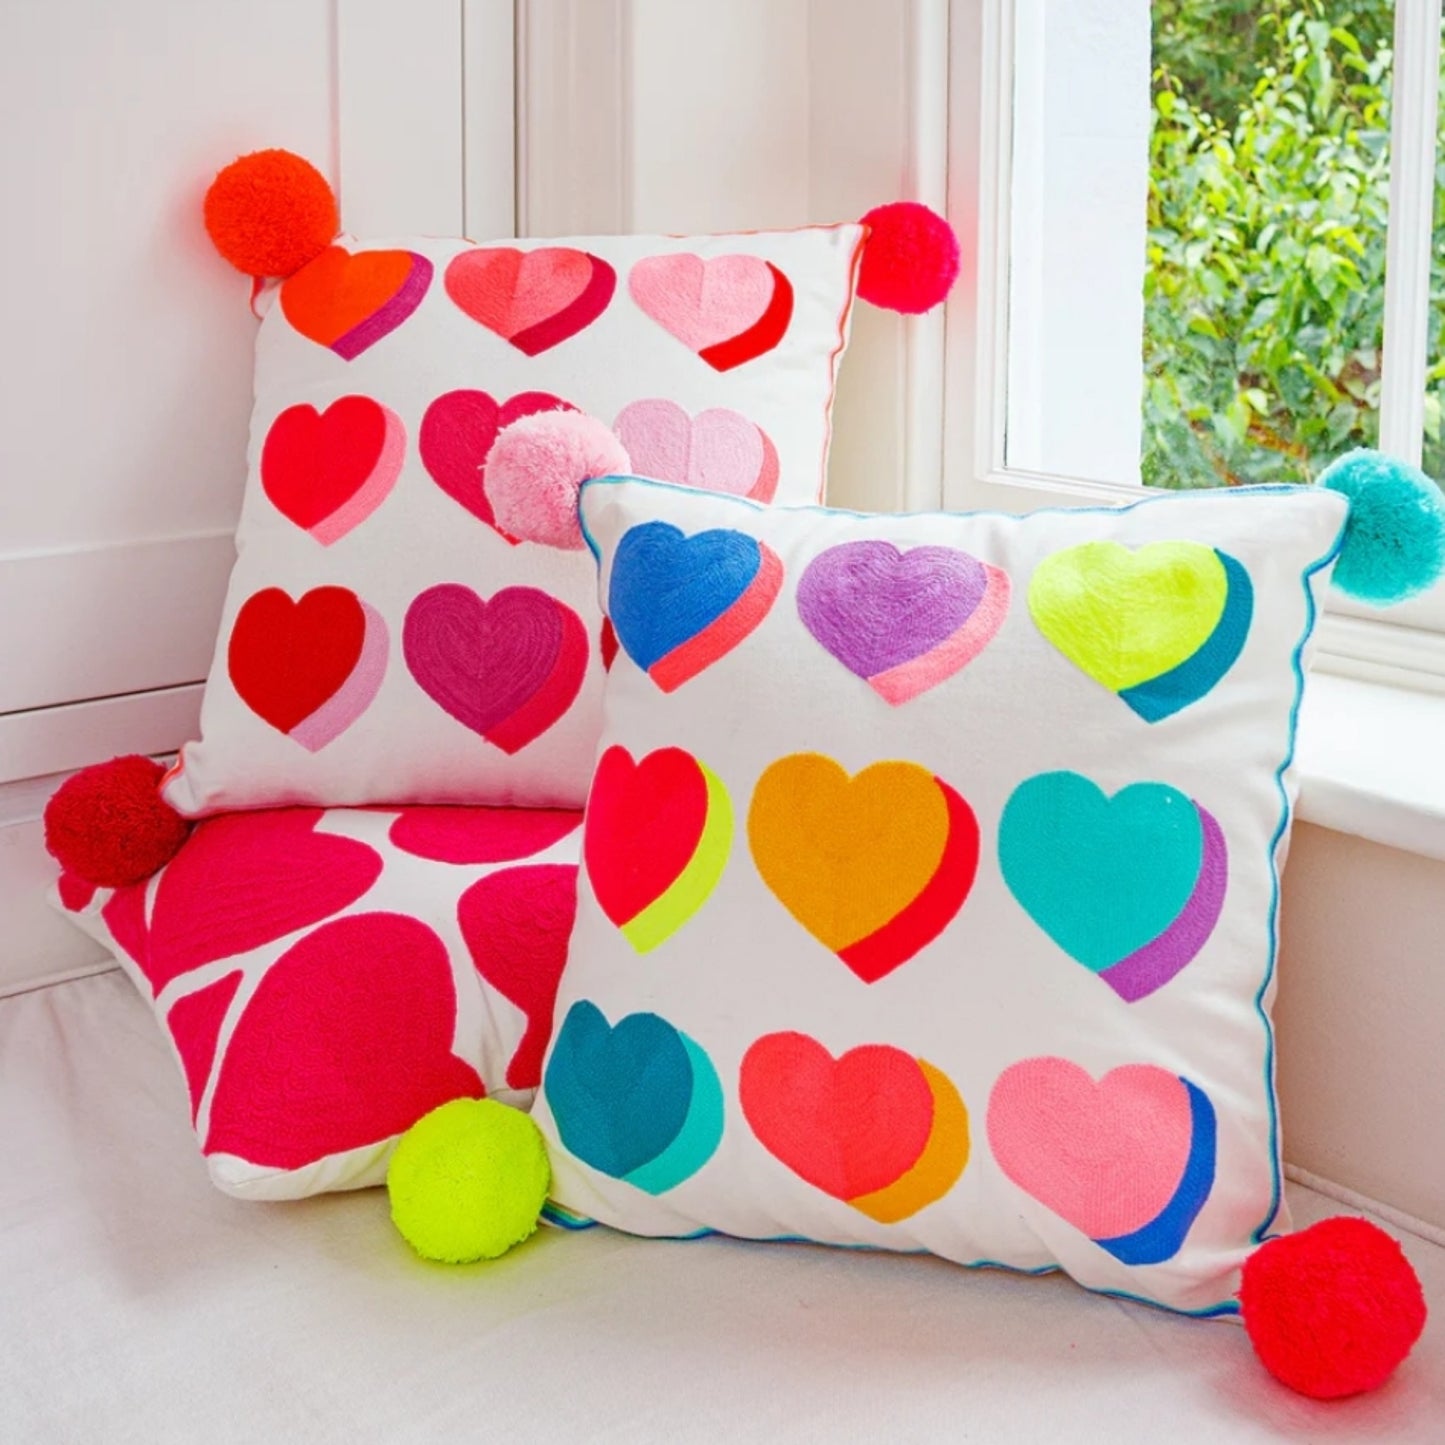 Letterpop Hearts Embroidered Cushion Multicoloured